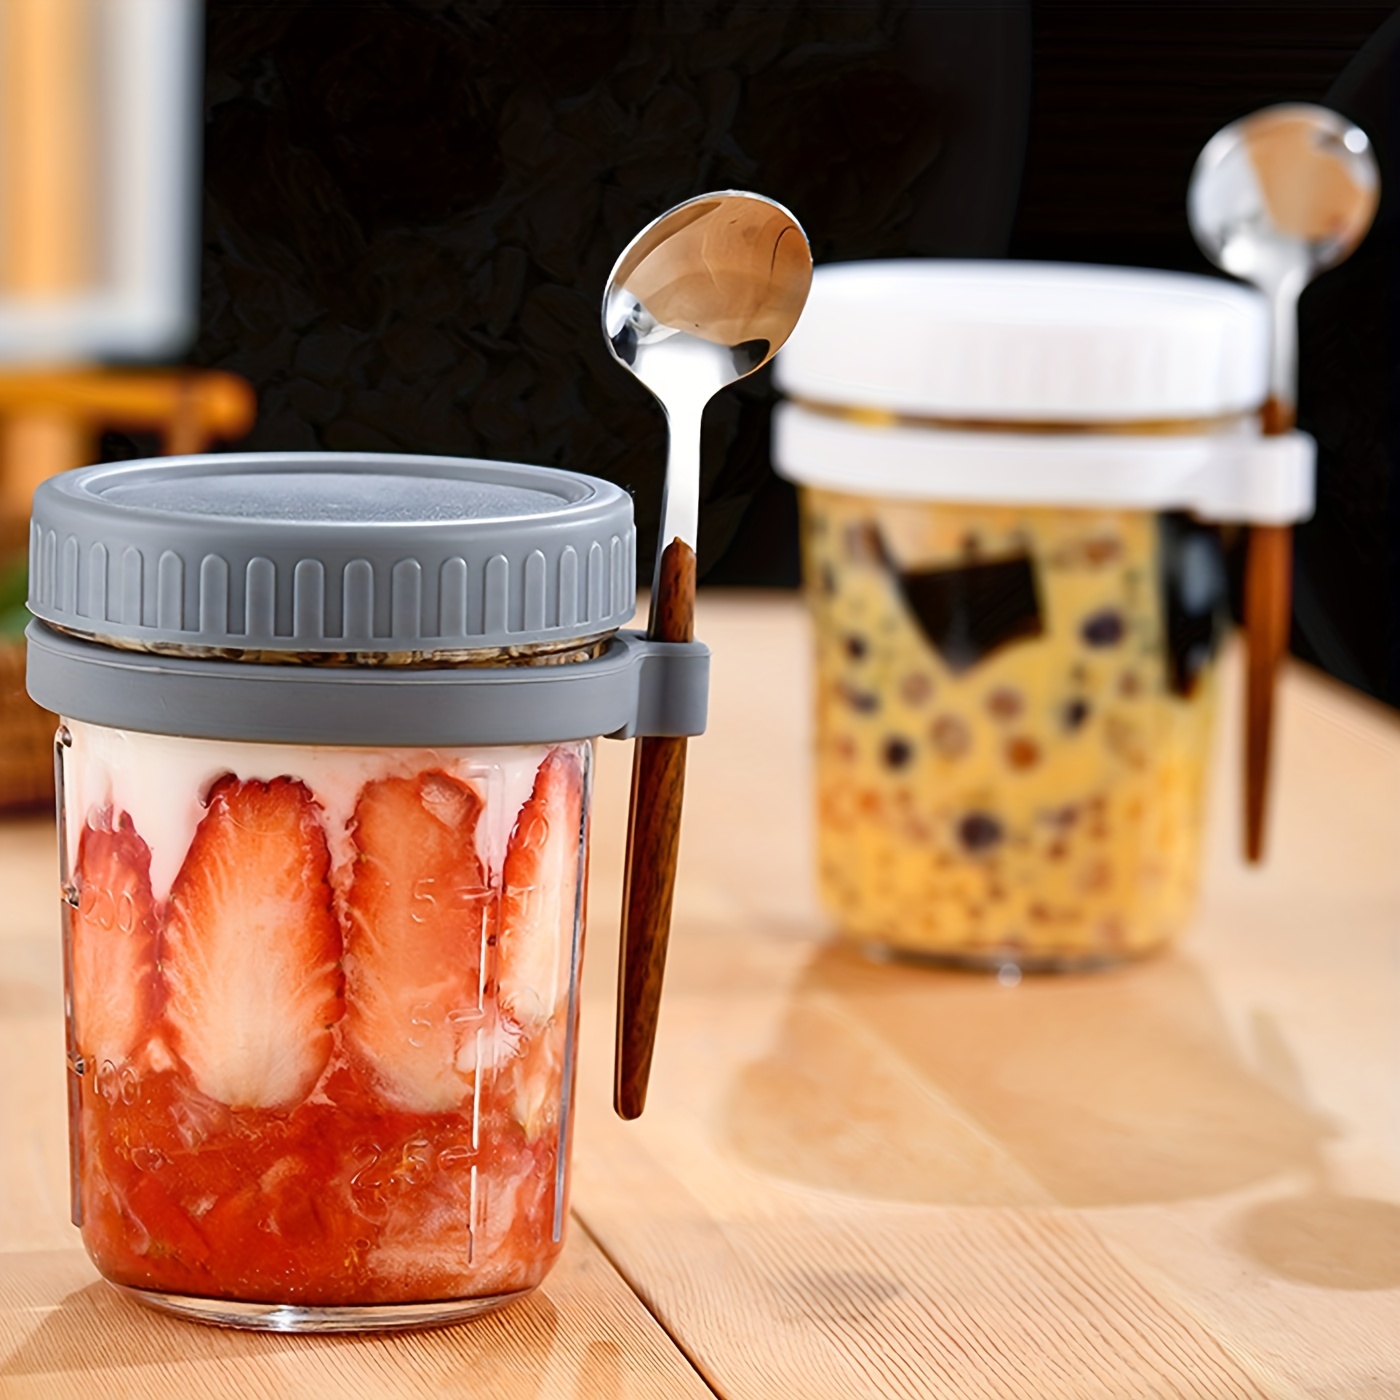 350ML Overnight Oats Containers with Lids and SpoonMason Jars for